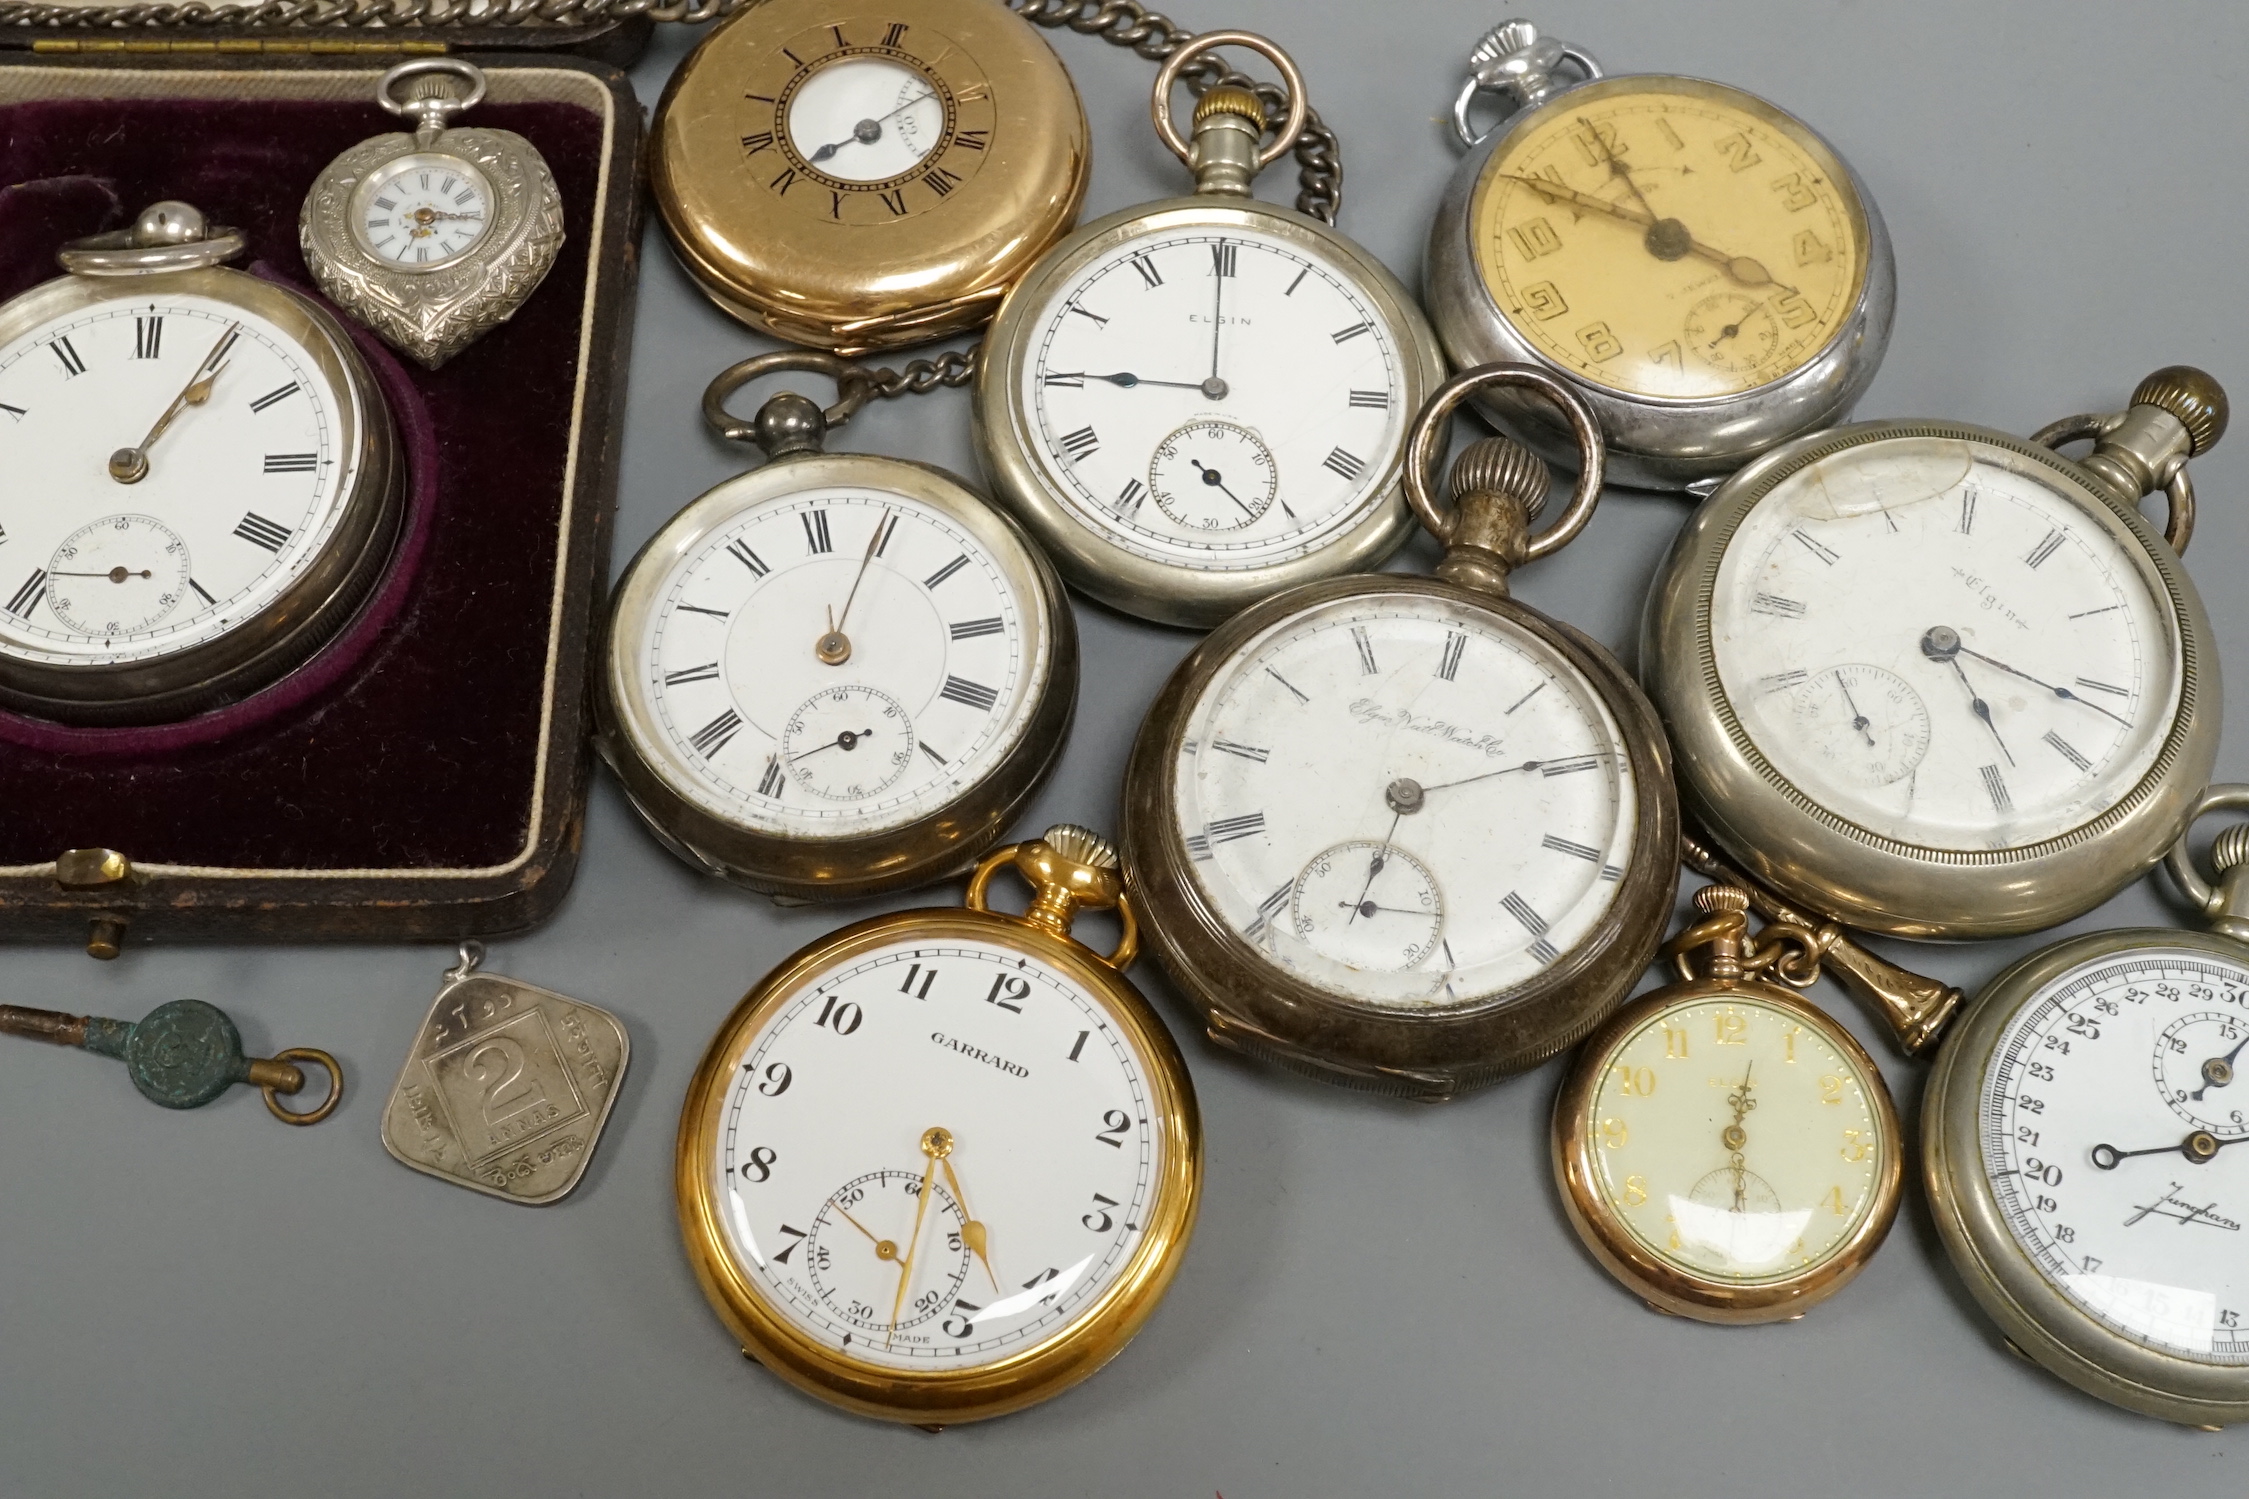 A collection of assorted wrist, fob and mainly pocket watches including Elgin and Garrard.